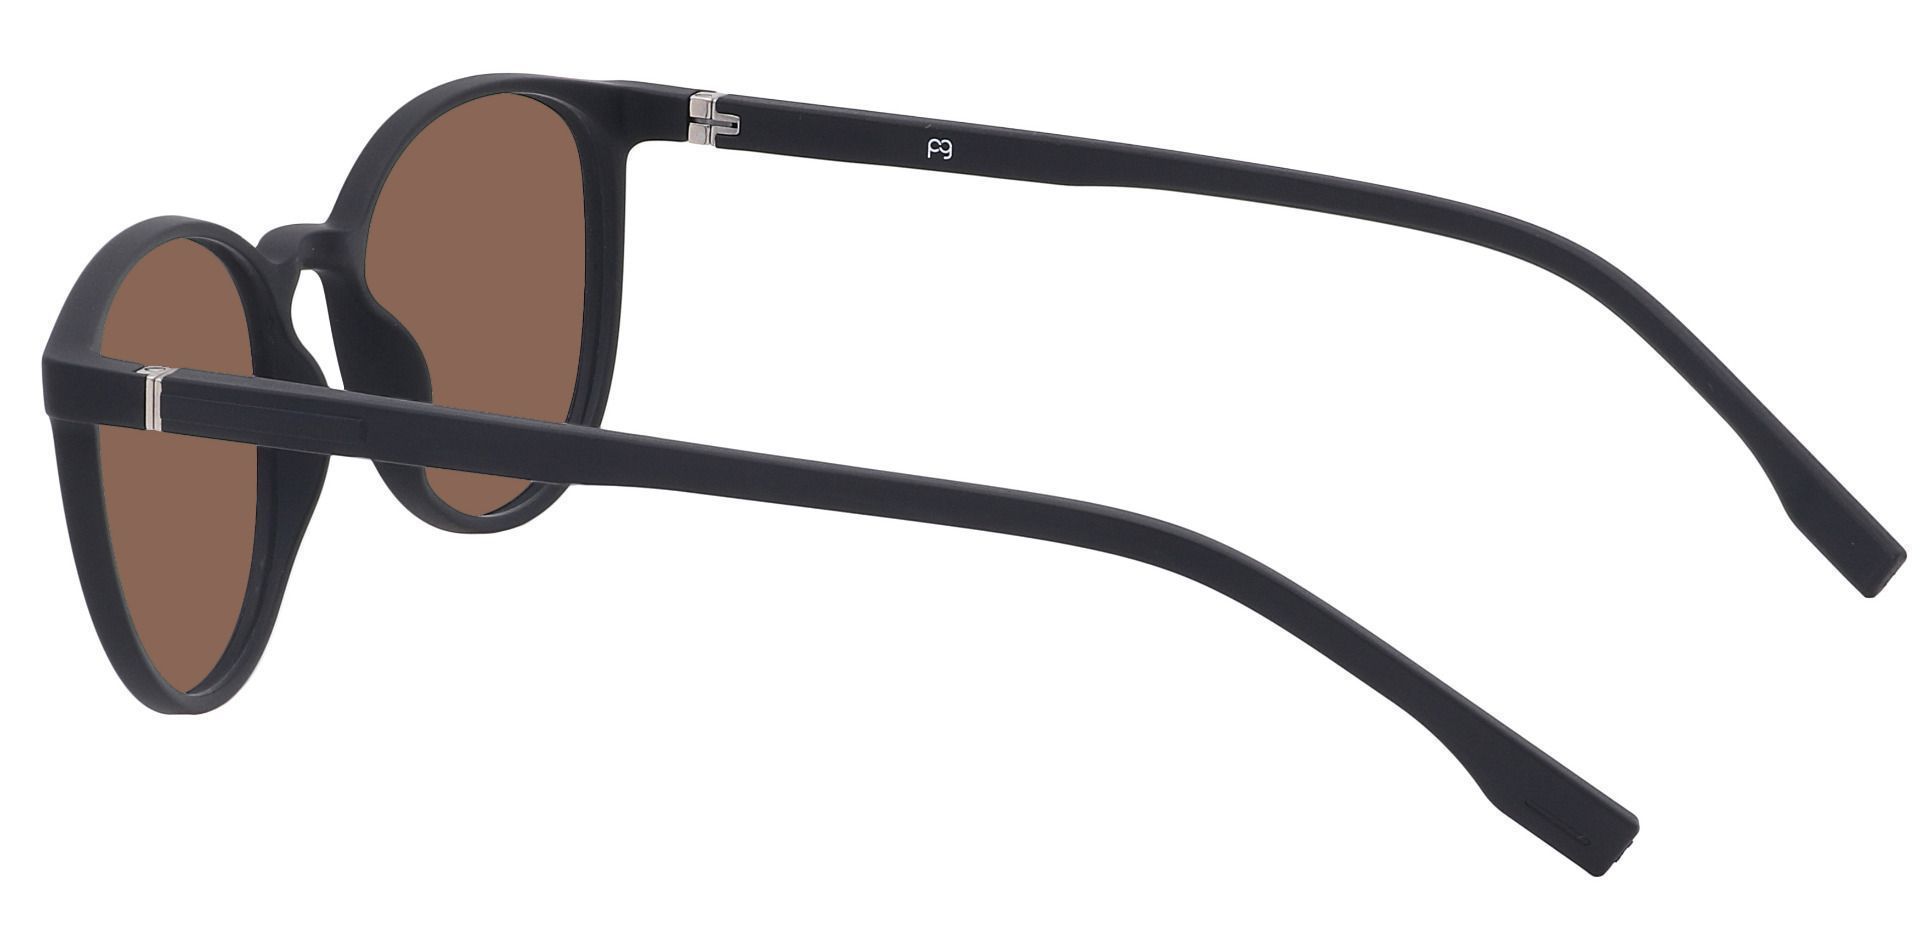 Bay Round Reading Sunglasses - Black Frame With Brown Lenses